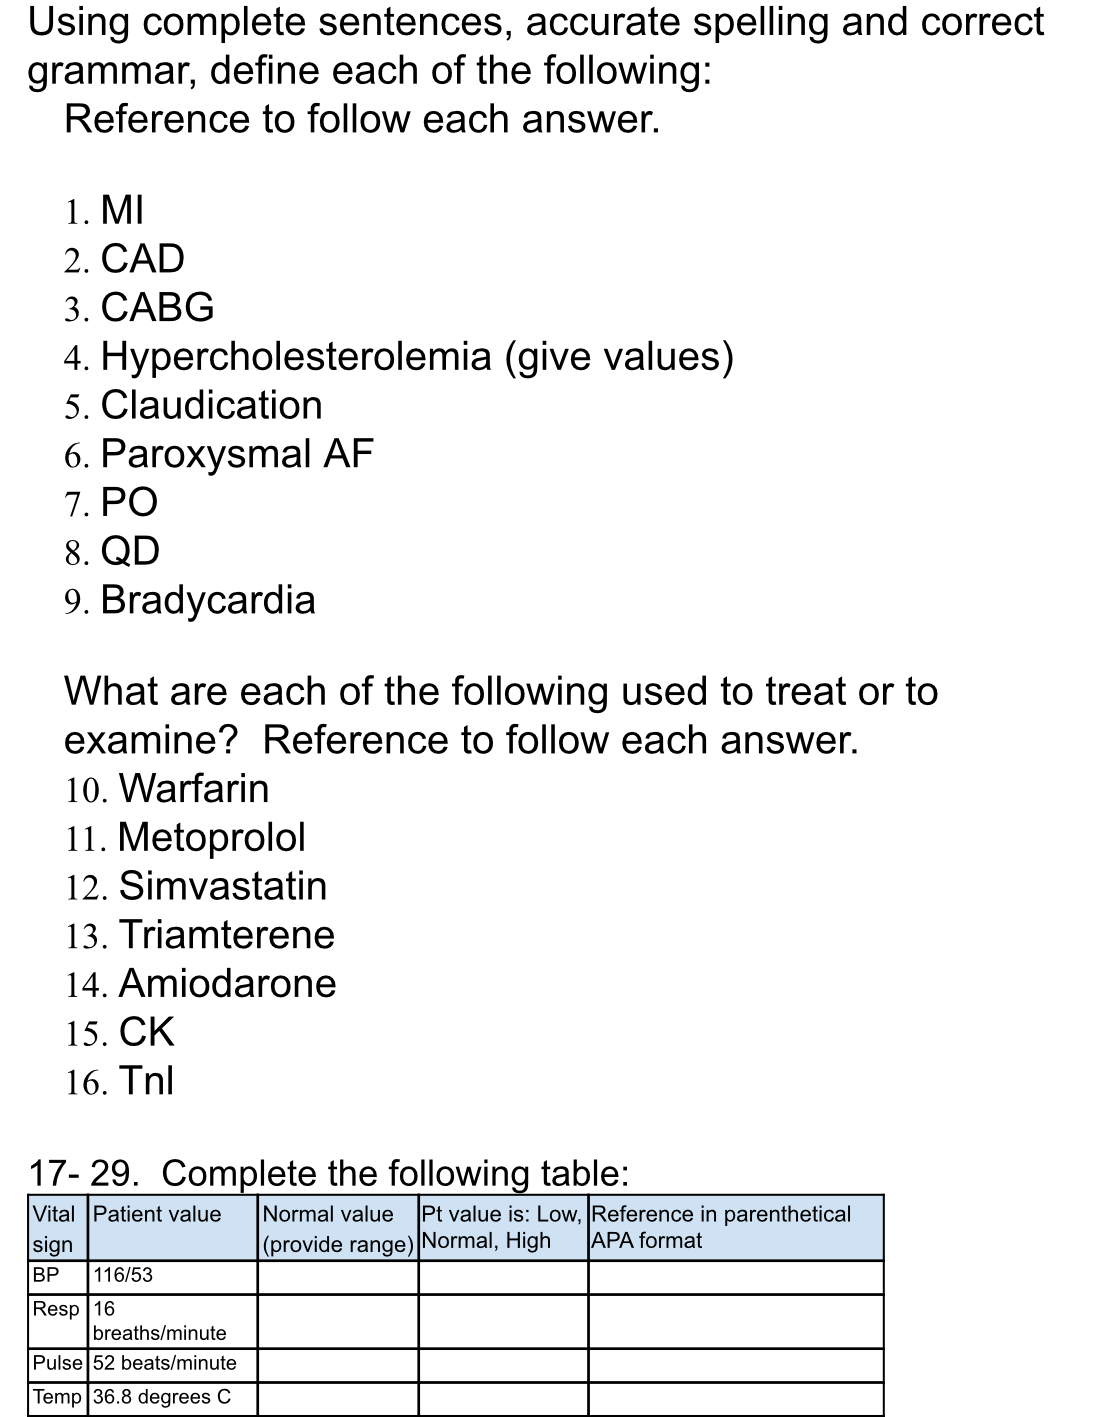 Using complete sentences, accurate spelling and correct
grammar, define each of the following:
Reference to follow each answer.
1. MI
2. CAD
3. CABG
4. Hypercholesterolemia (give values)
5. Claudication
6. Paroxysmal AF
7. PO
8. QD
9. Bradycardia
What are each of the following used to treat or to
examine? Reference to follow each answer.
10. Warfarin
11. Metoprolol
12. Simvastatin
13. Triamterene
14. Amiodarone
15. ČK
16. Tnl
17- 29. Complete the following table:
Pt value is: Low, Reference in parenthetical
APA format
Vital Patient value
Normal value
sign
BP
(provide range) Normal, High
116/53
Resp 16
breaths/minute
Pulse 52 beats/minute
Temp 36.8 degrees C
